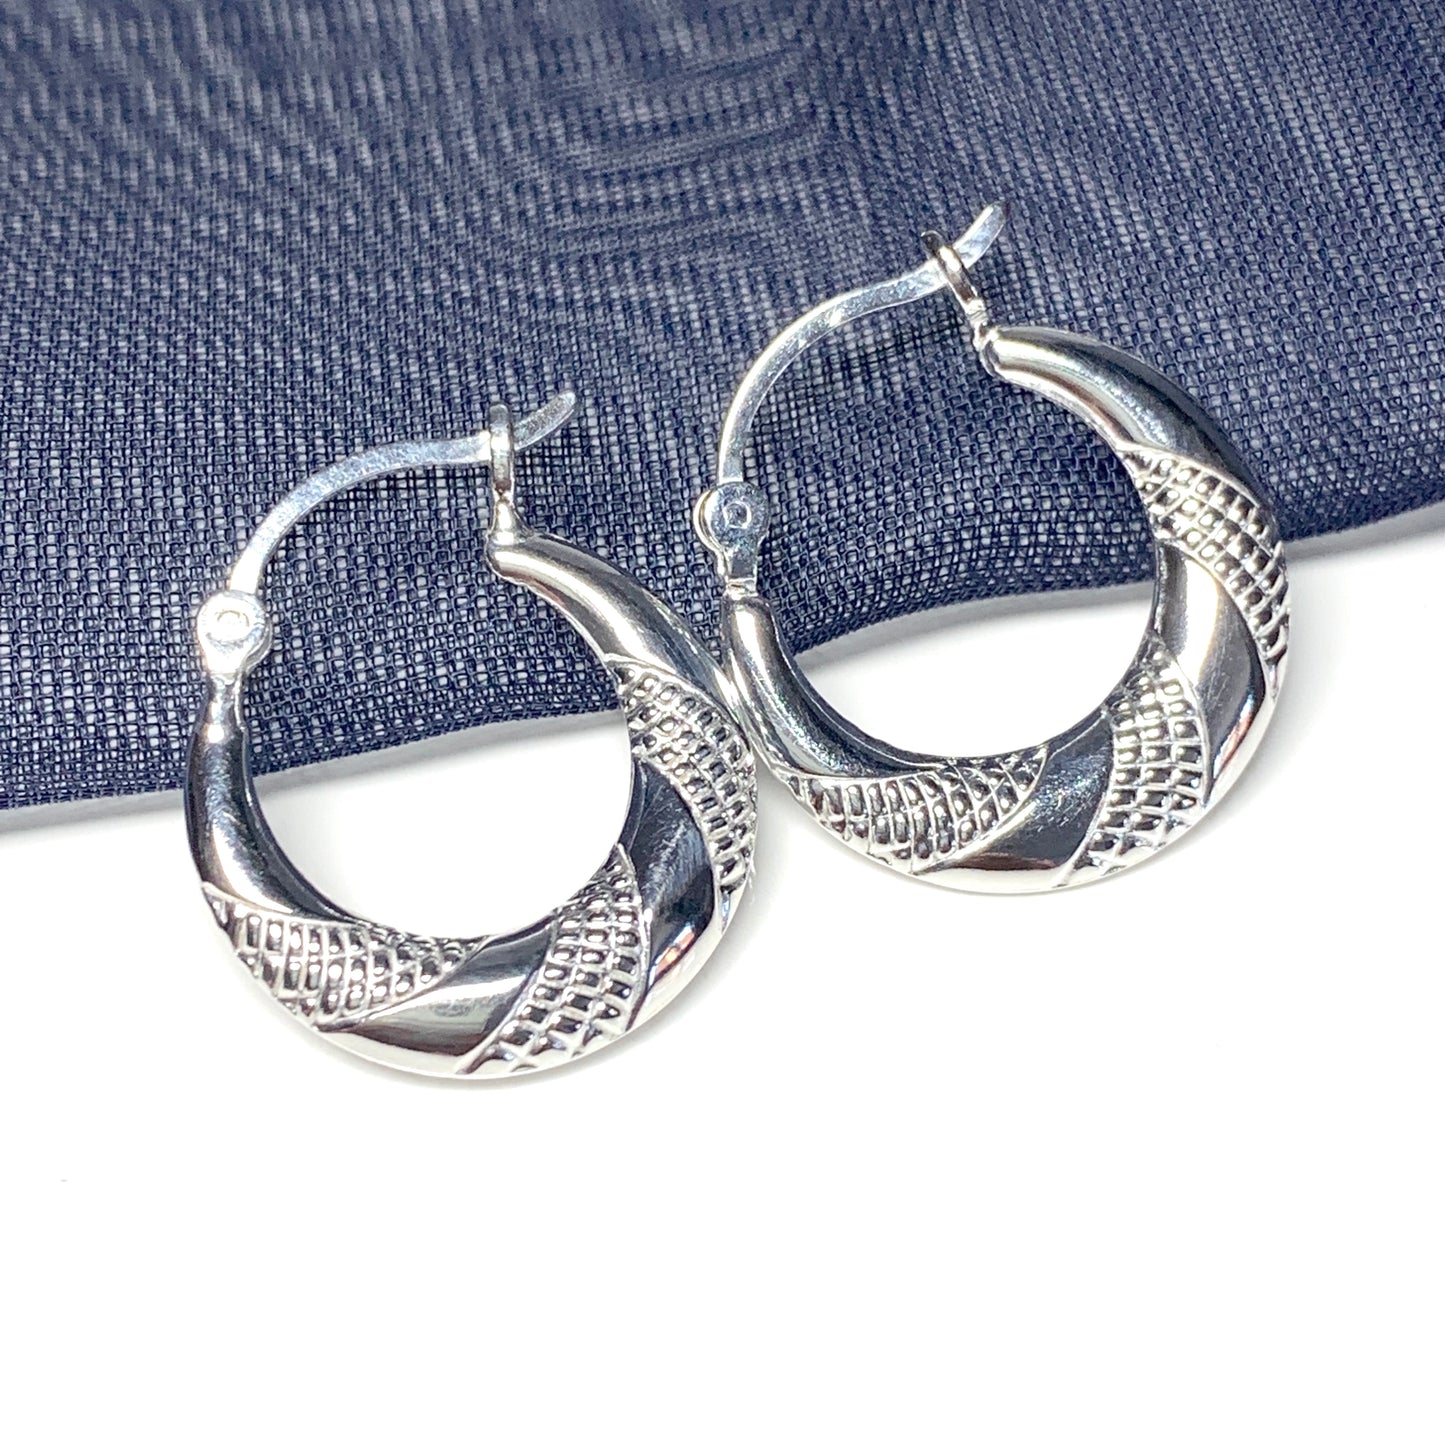 Sterling silver patterned round creole earrings